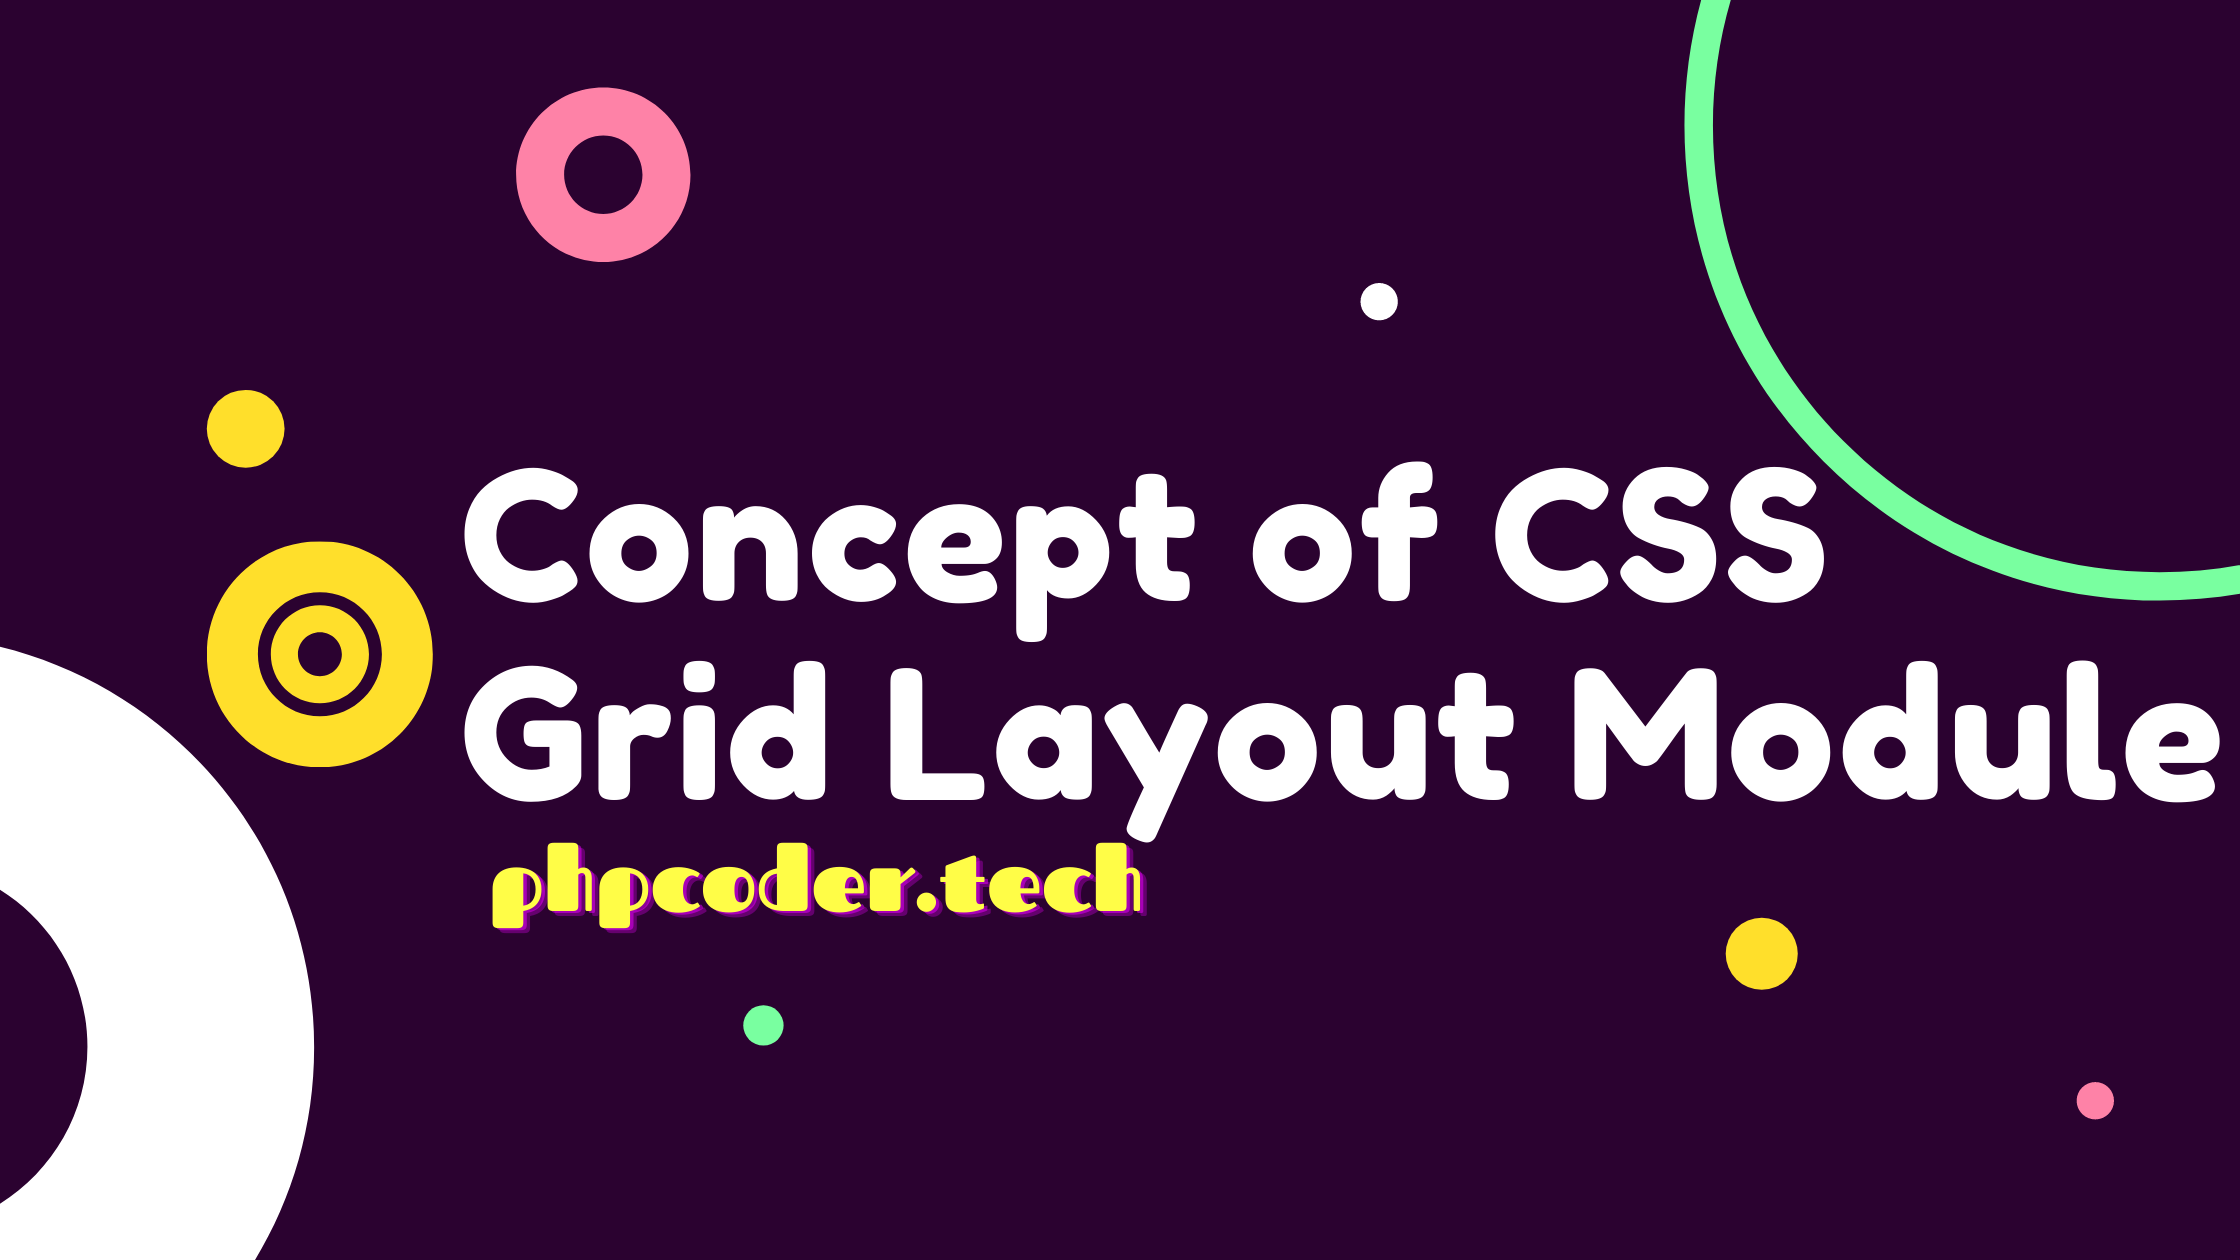 Concept of CSS Grid Layout